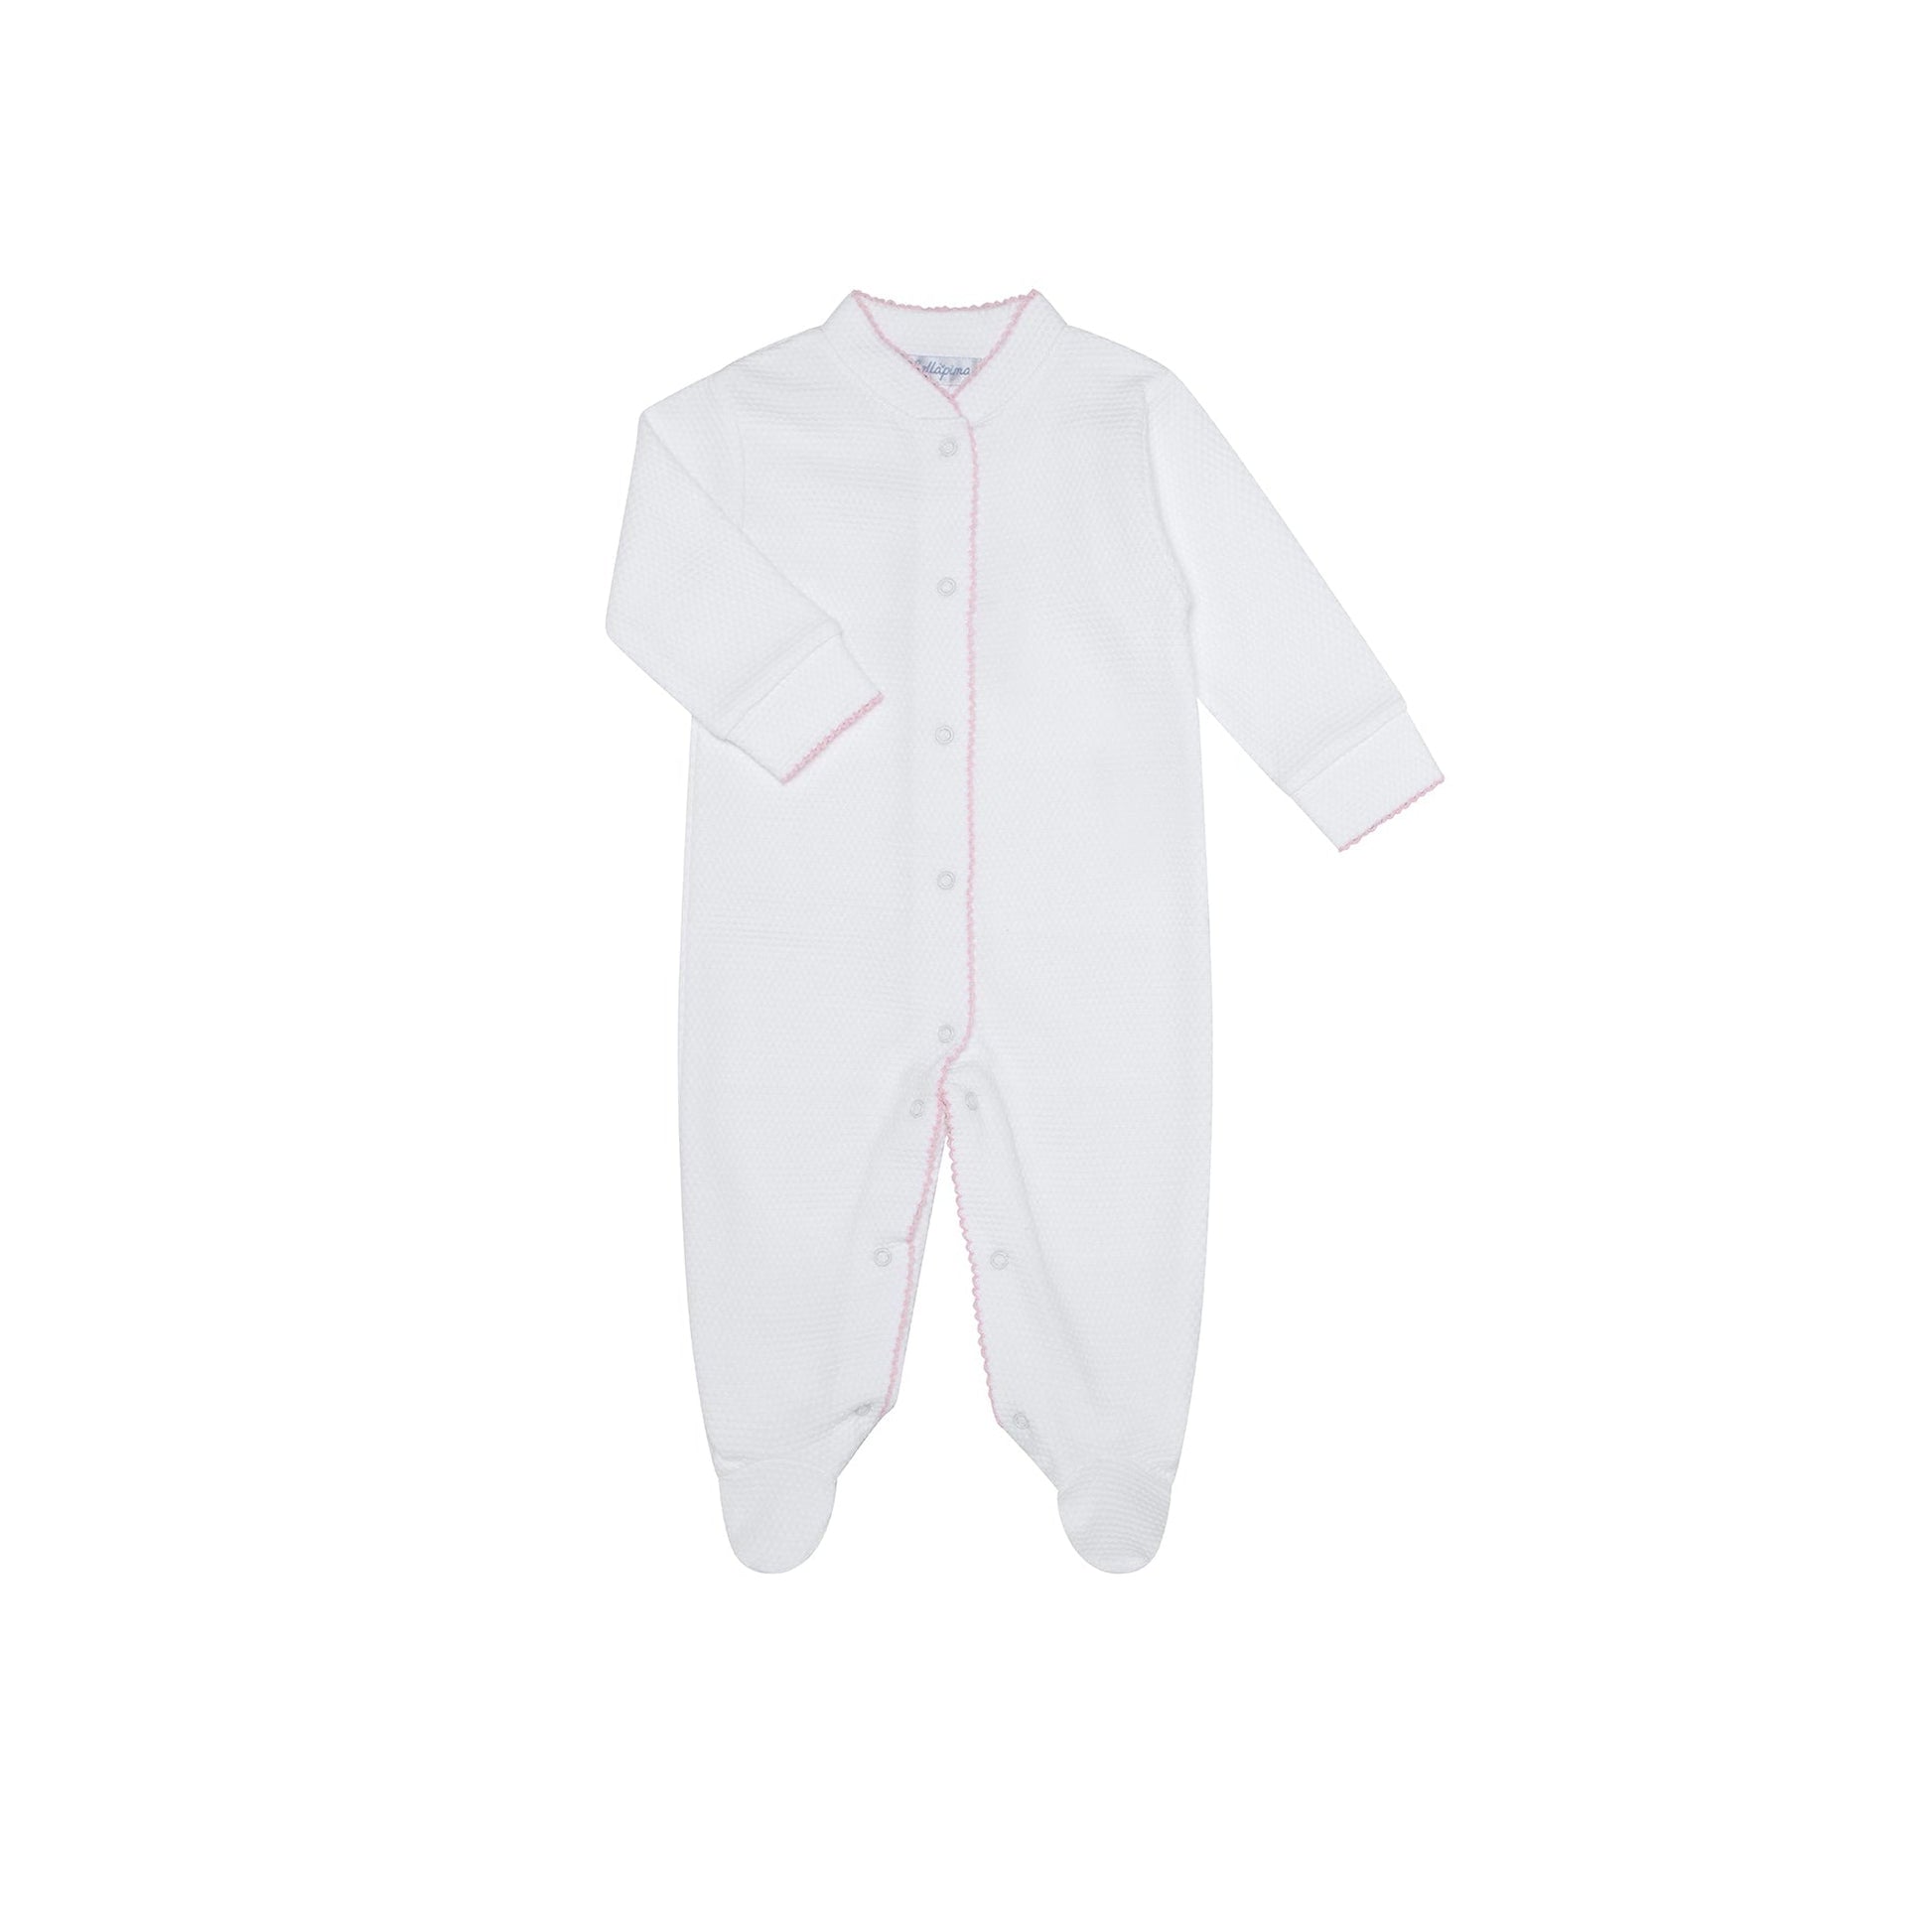 Pima Cotton Bubble Baby Footie White / Pink - Give Wink